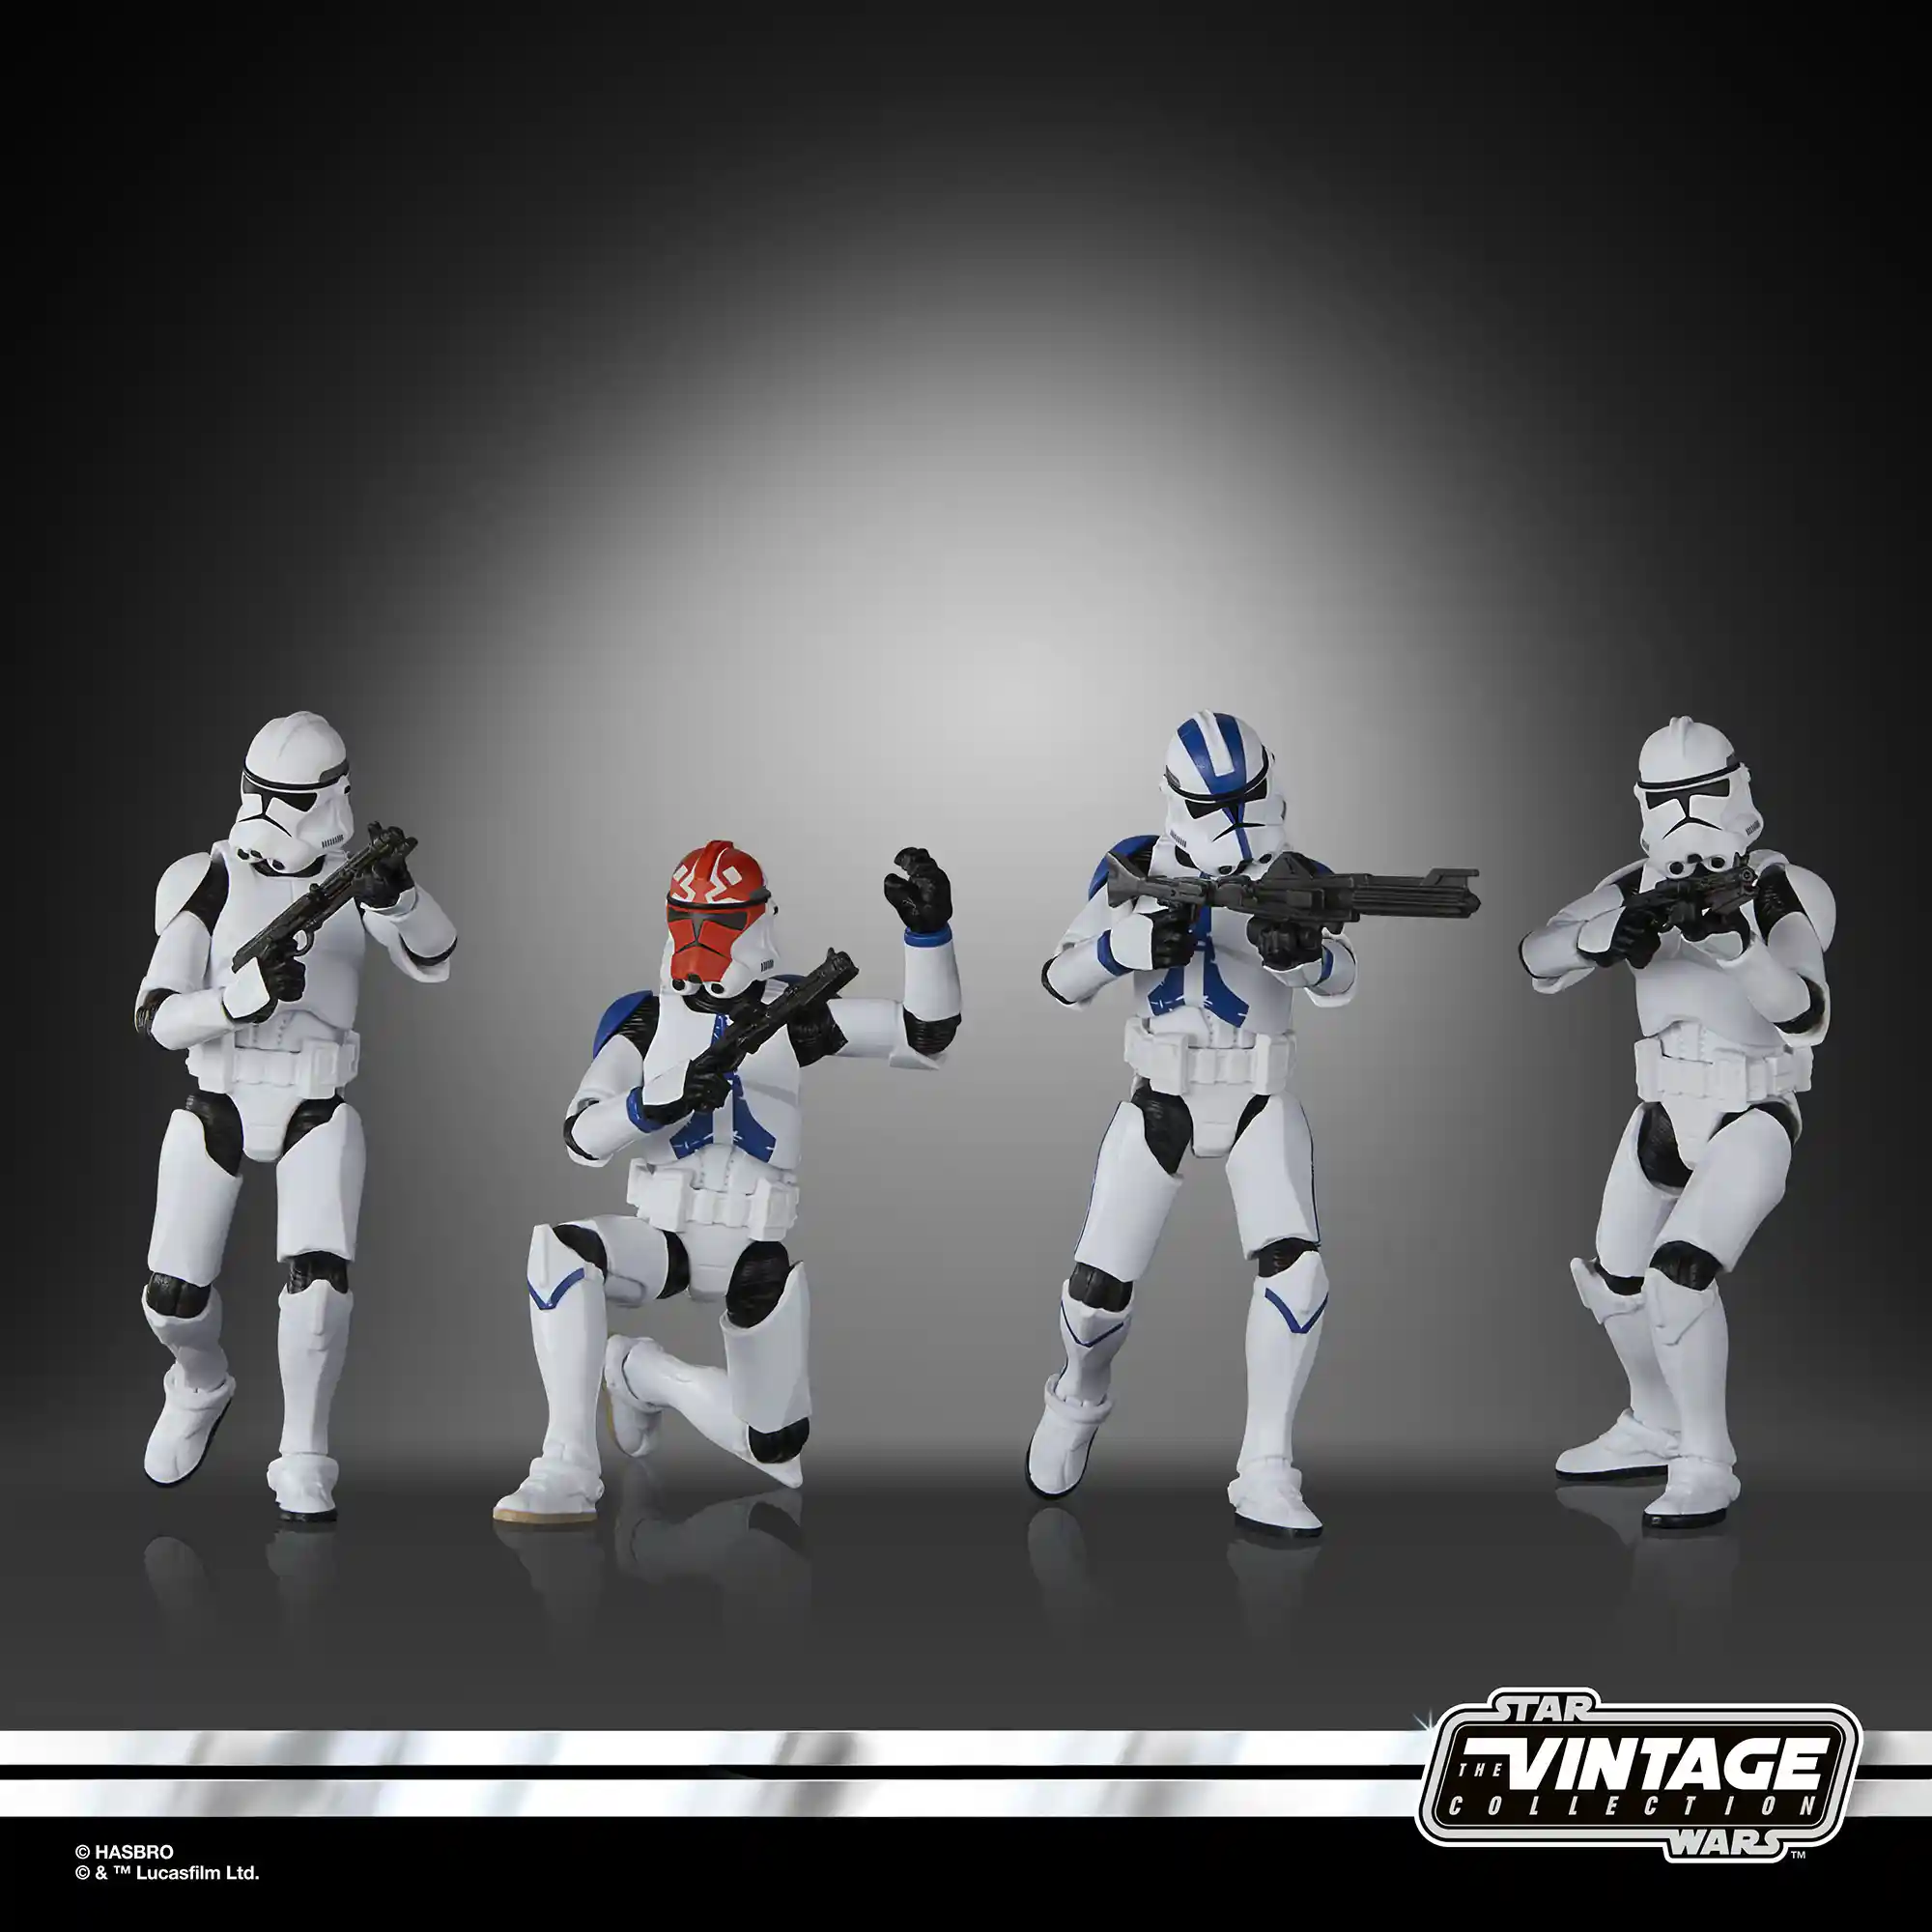 Vintage Collection Phase II Clone Troopers